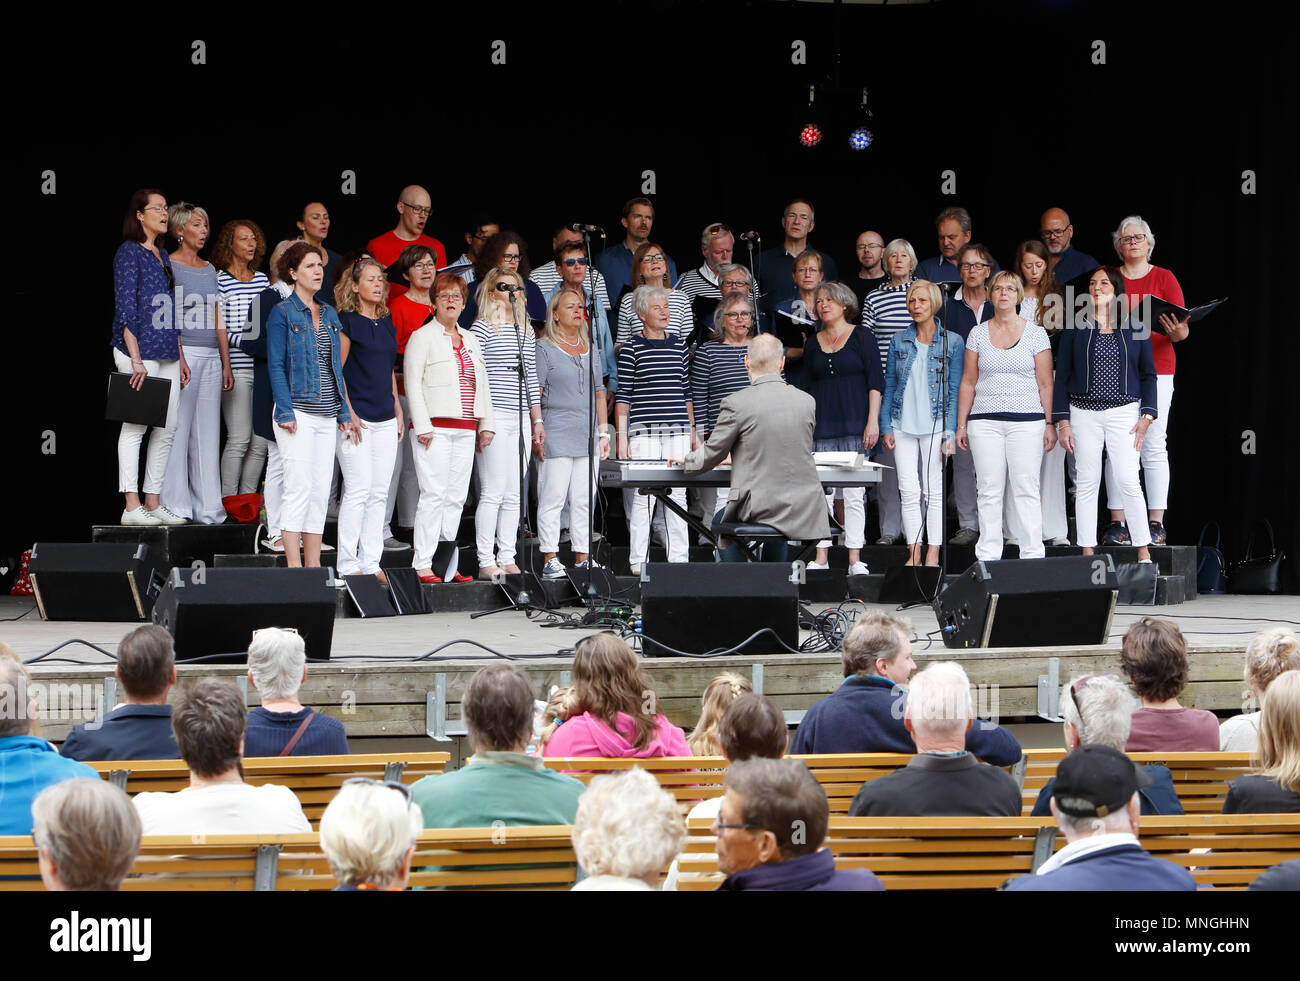 Strangnas, Sweden - May 20, 2017: he singing choir Lovsangarna perform for an audience at an outdoor stage in the Ugglans park during the Kultur 17 cu Stock Photo